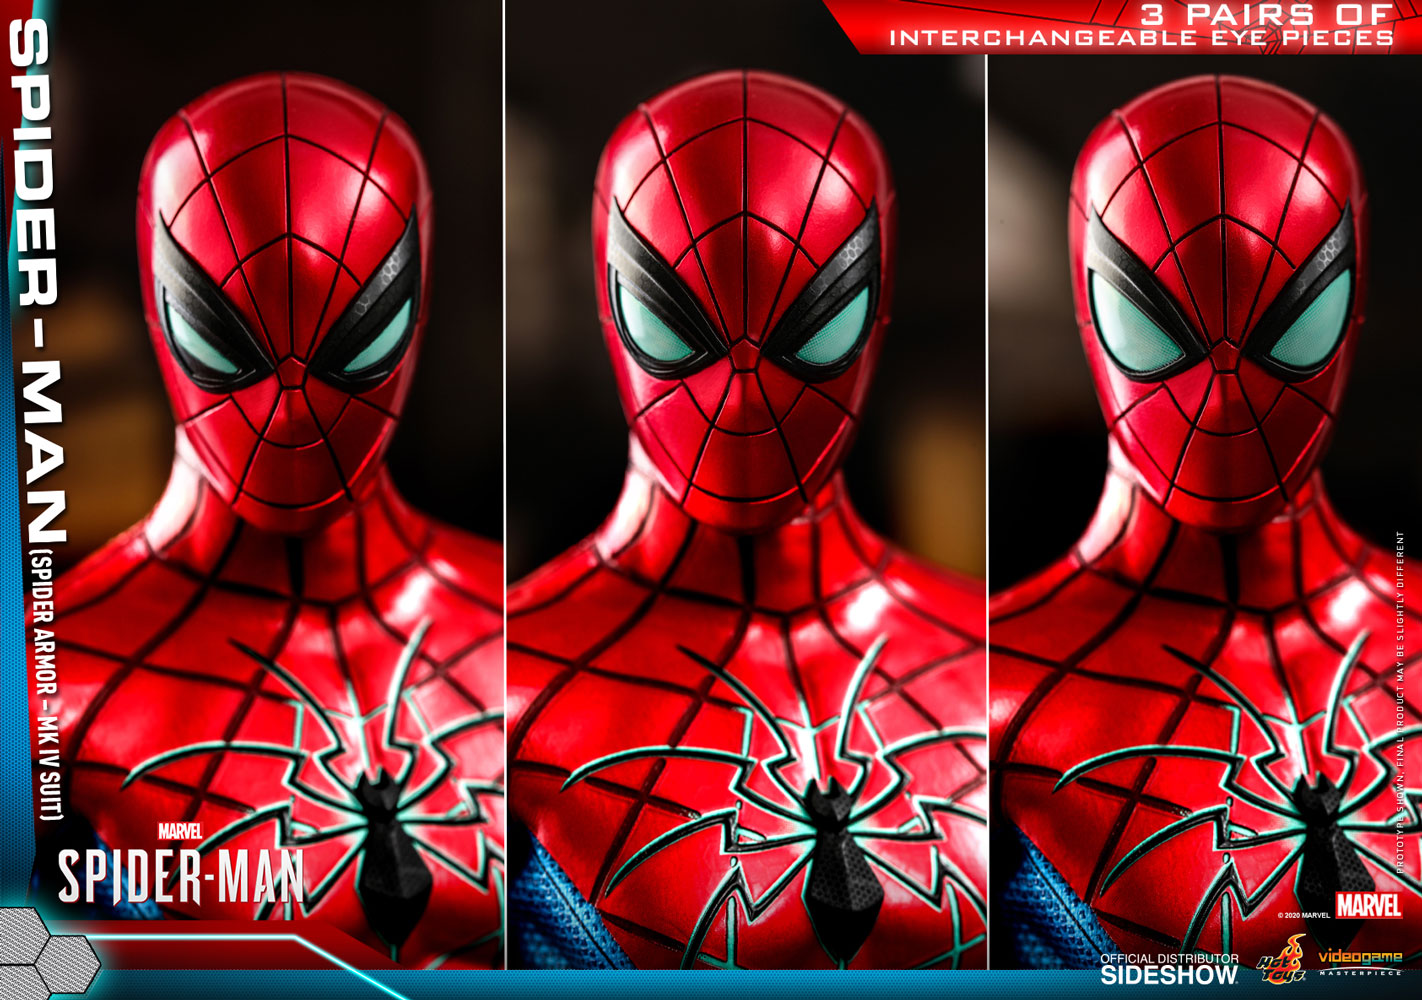 Spider-man (Spider Armor Mk. IV) - Marvel's Spider-man Game - Sixth Scale Figure by Hot Toys